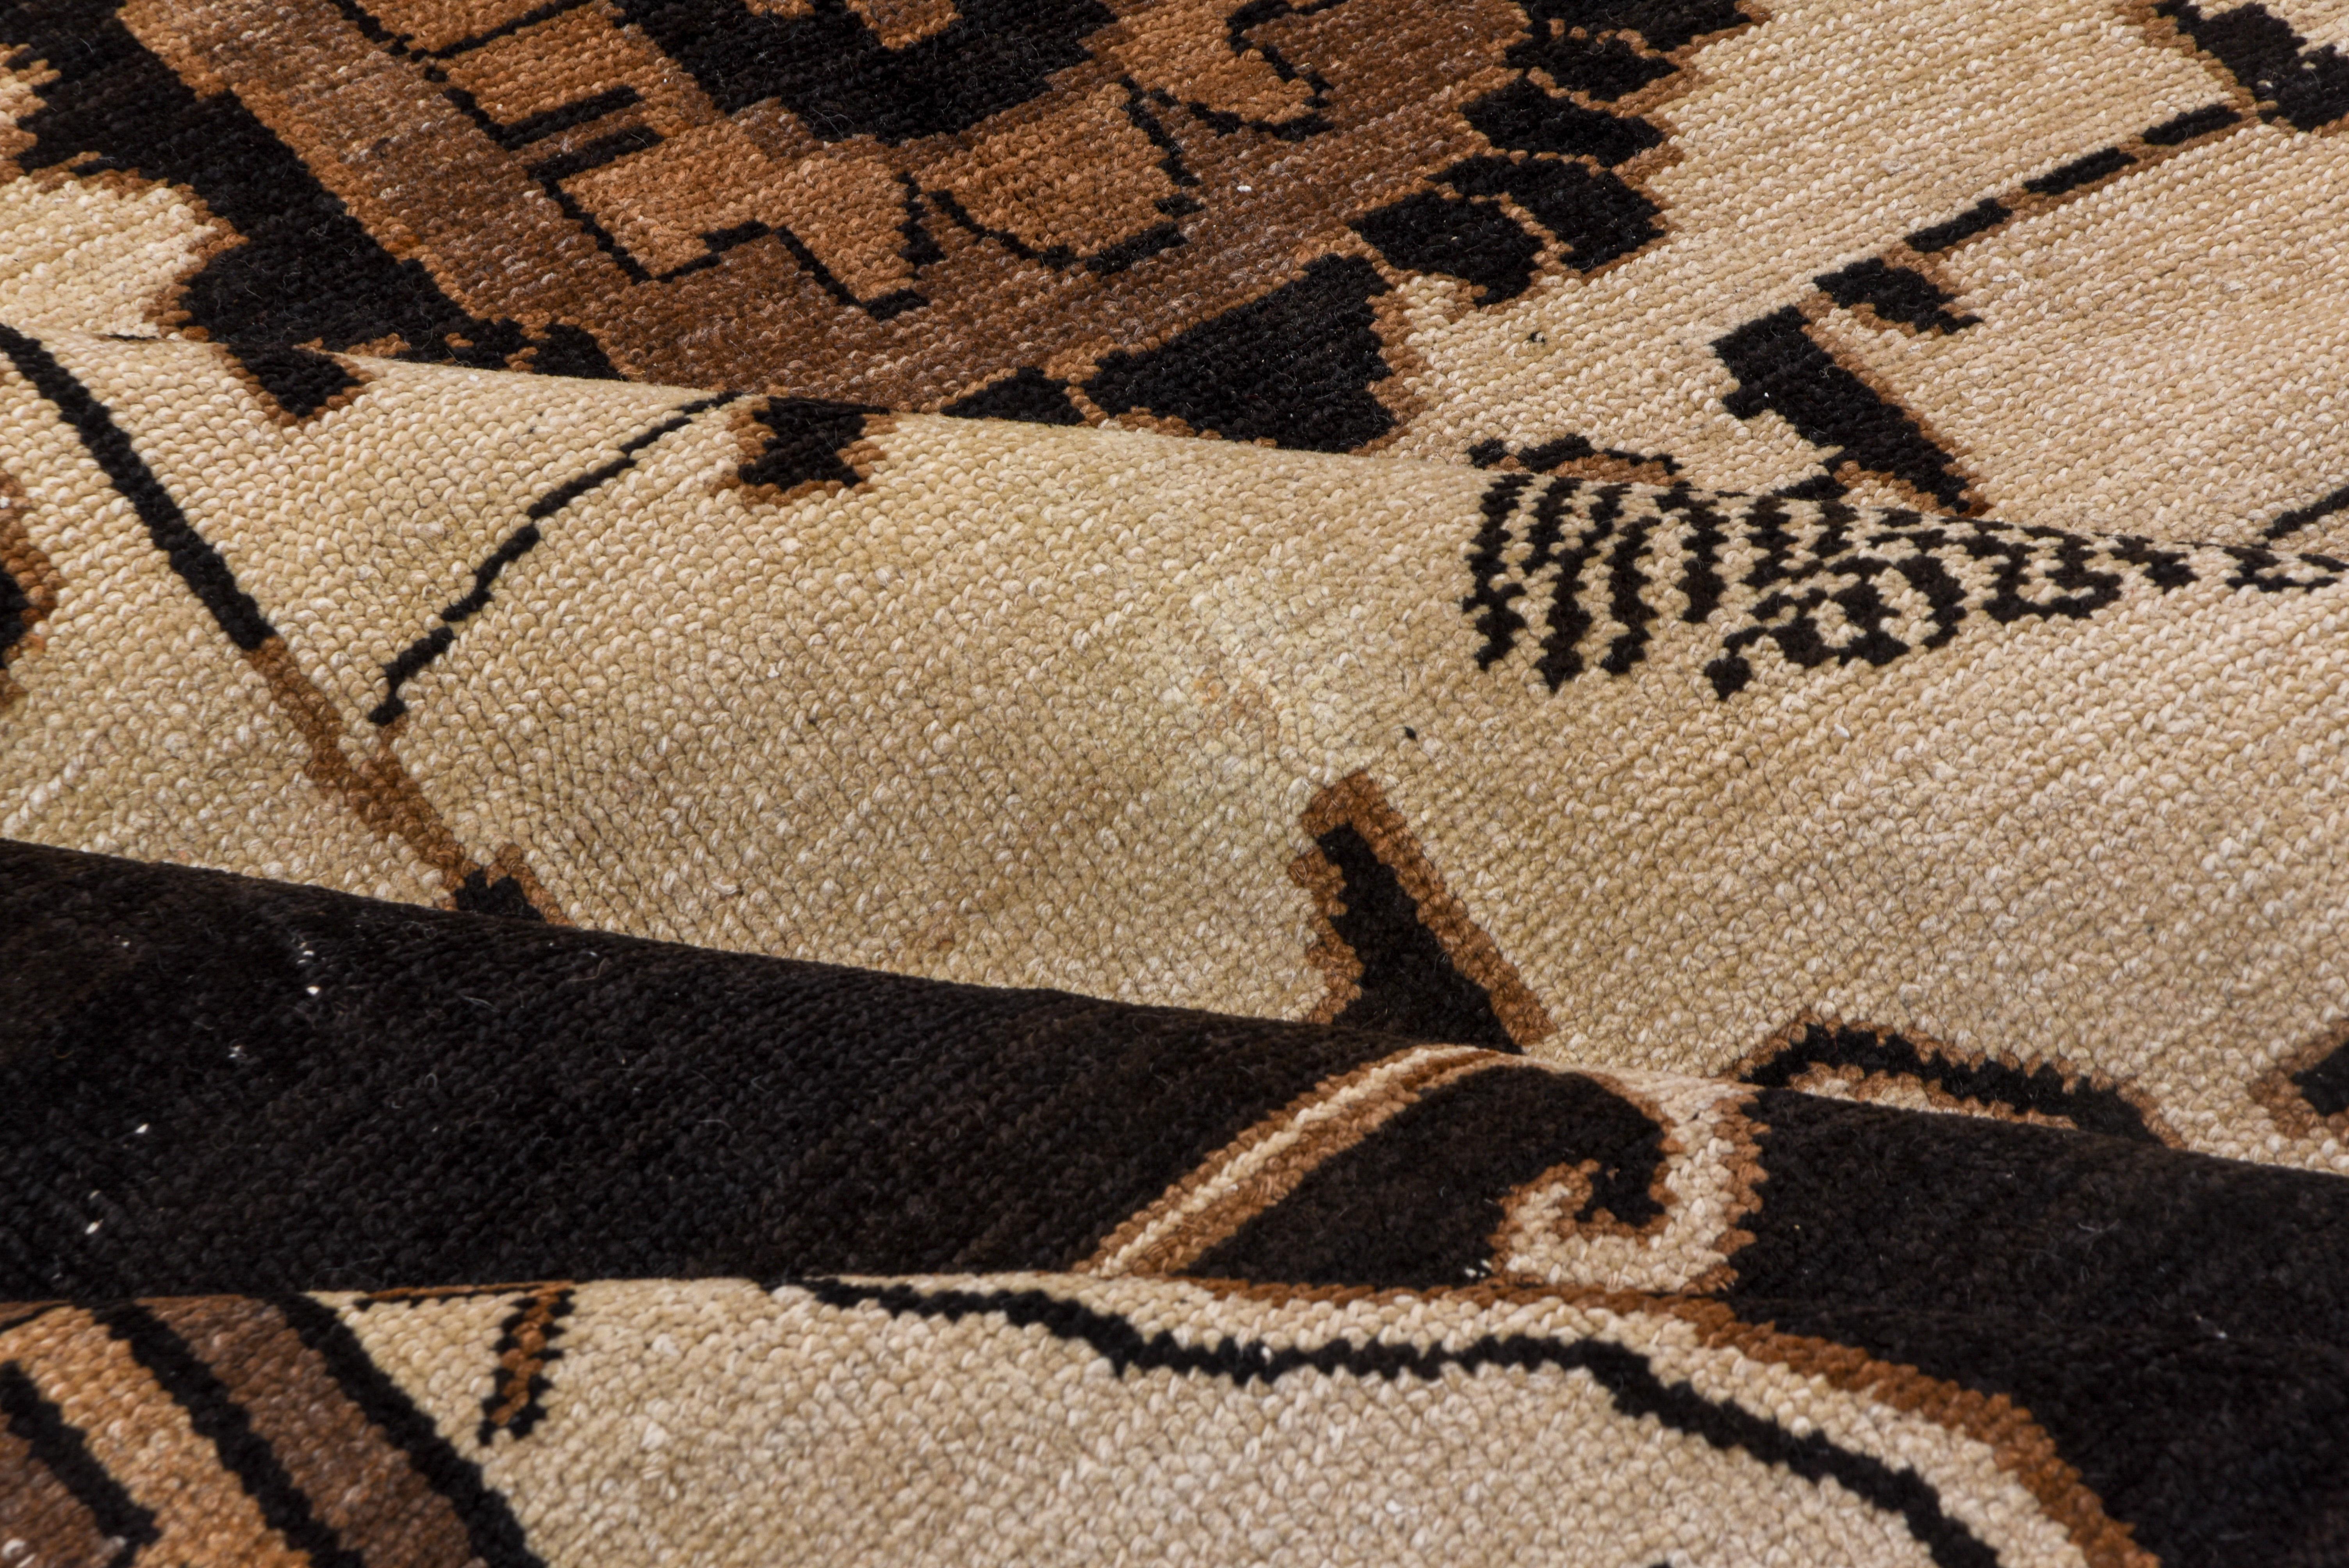 Hand-Knotted Mid-20th Century Rustic Turkish Kars Rug, Black Innter Field, Cream Outer Field